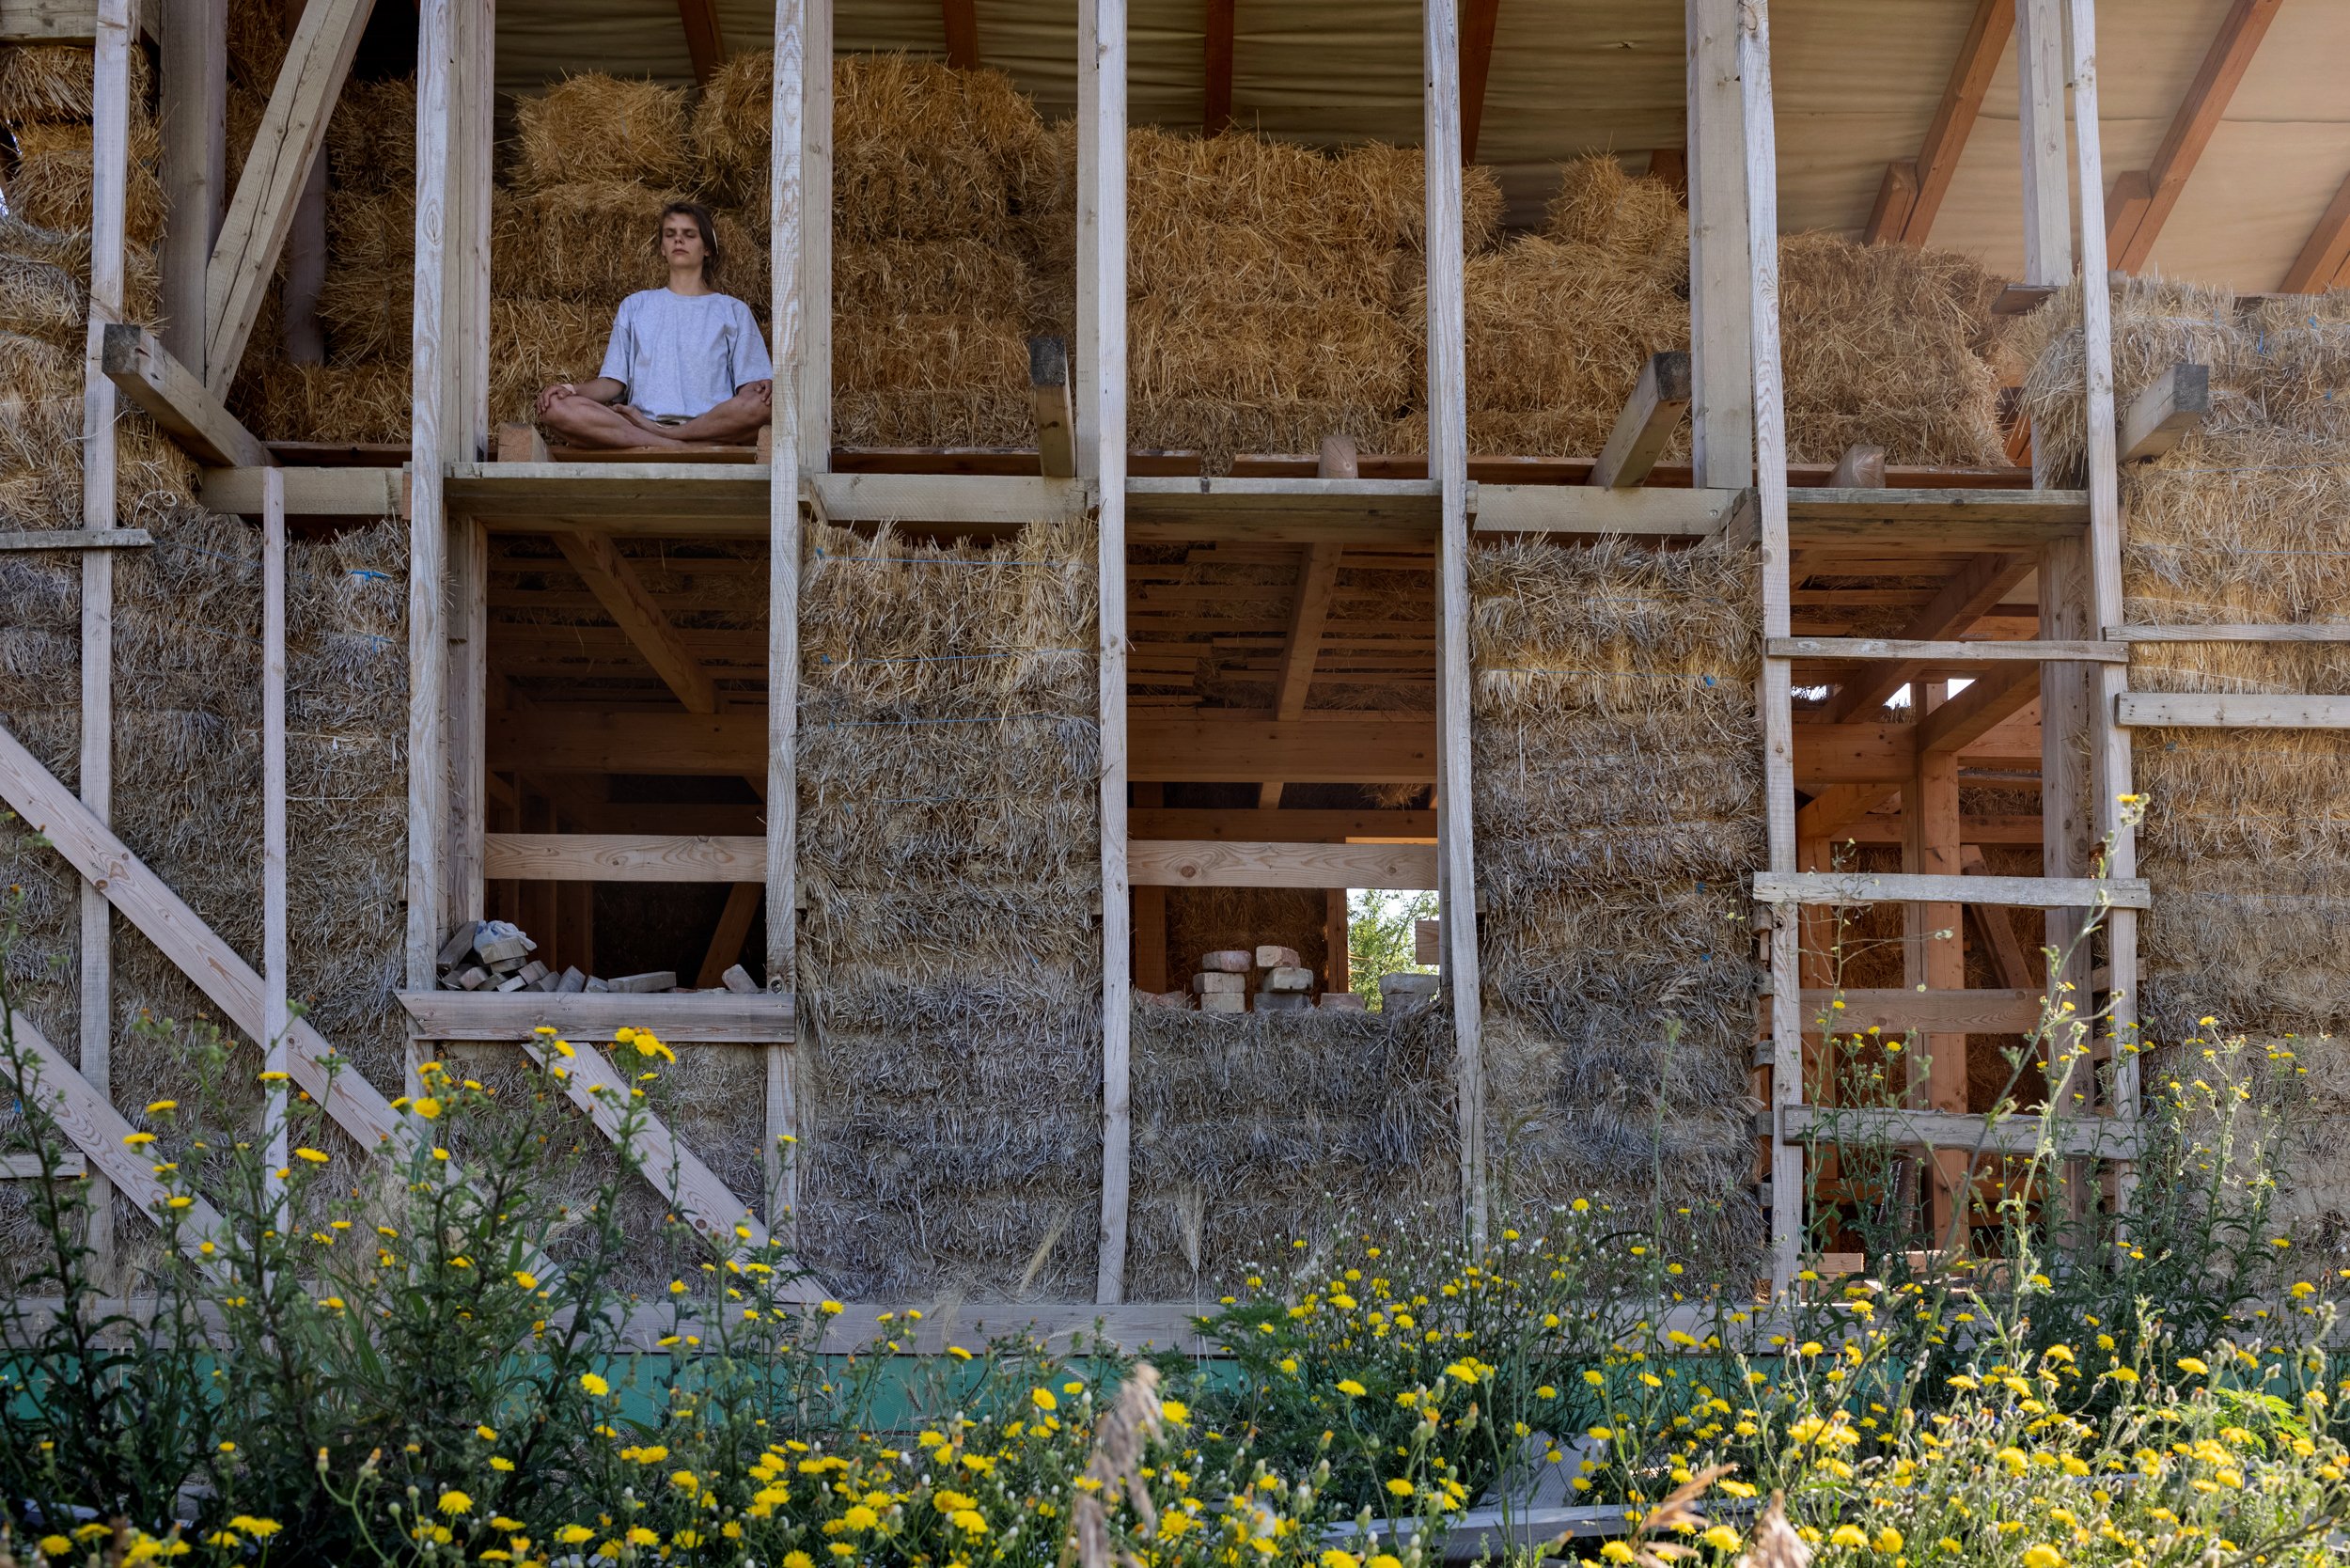  Sonja meditating on the floor of a straw bale house overlooking the Eco-meadow in Nyim on July 3, 2022. The Finnish volunteer spent six months with the community in Somogy County in the framework of the ESC (European Solidarity Corps) program, learn